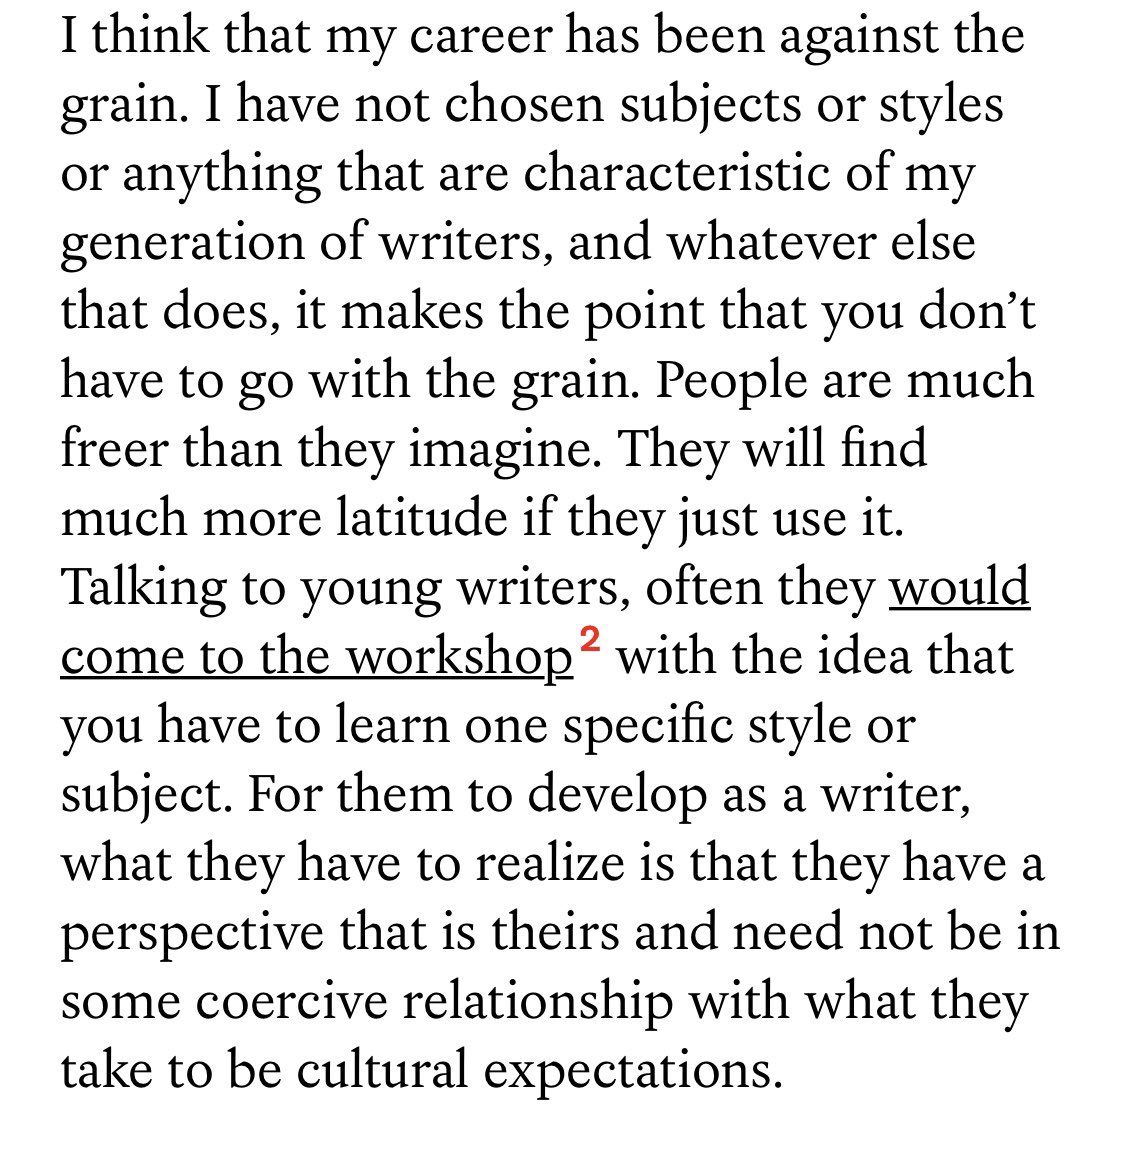 Love this quote from Marilynne Robinson from the recent @nytimes interview: